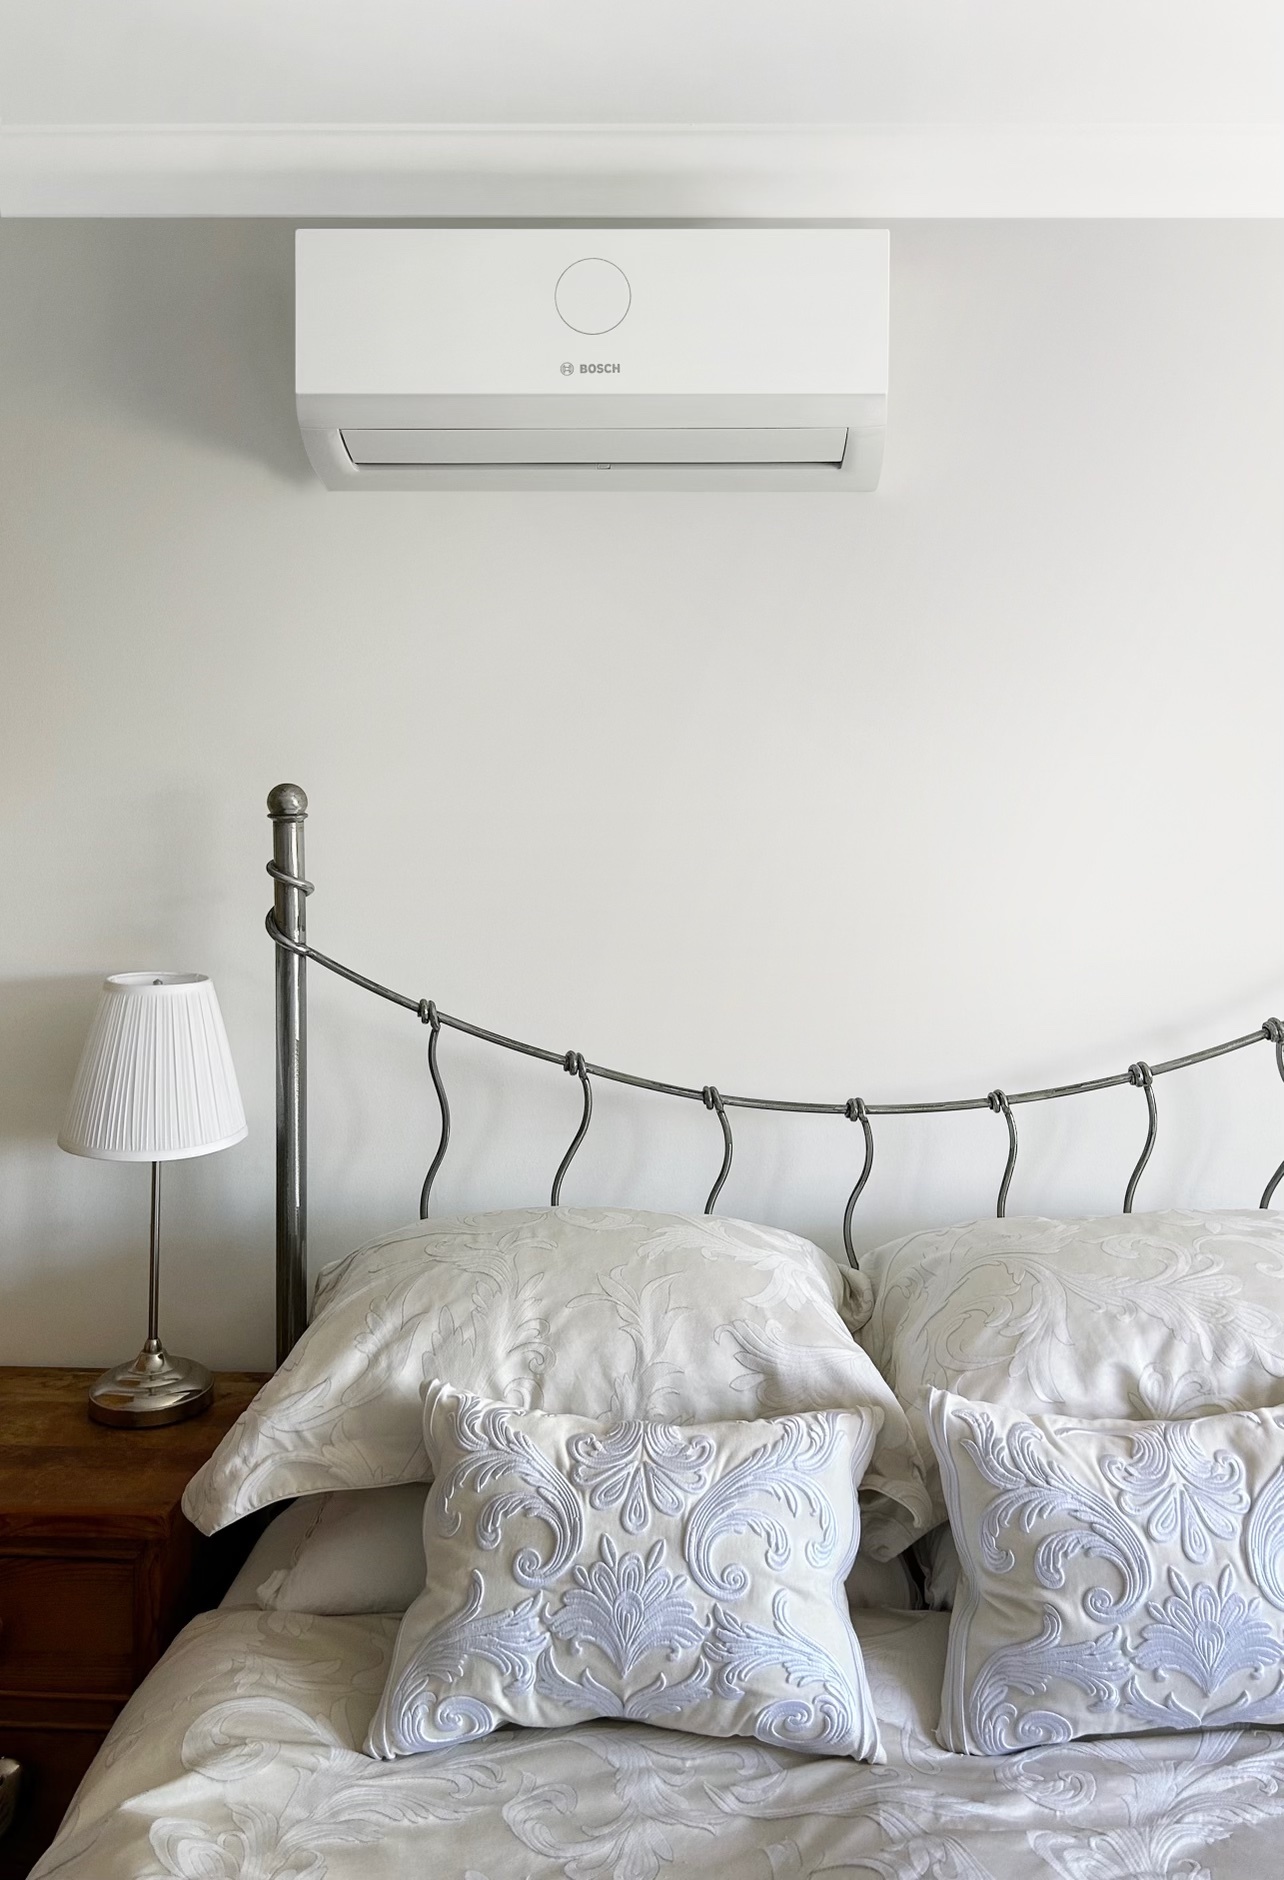 Air conditioning installers Northampton